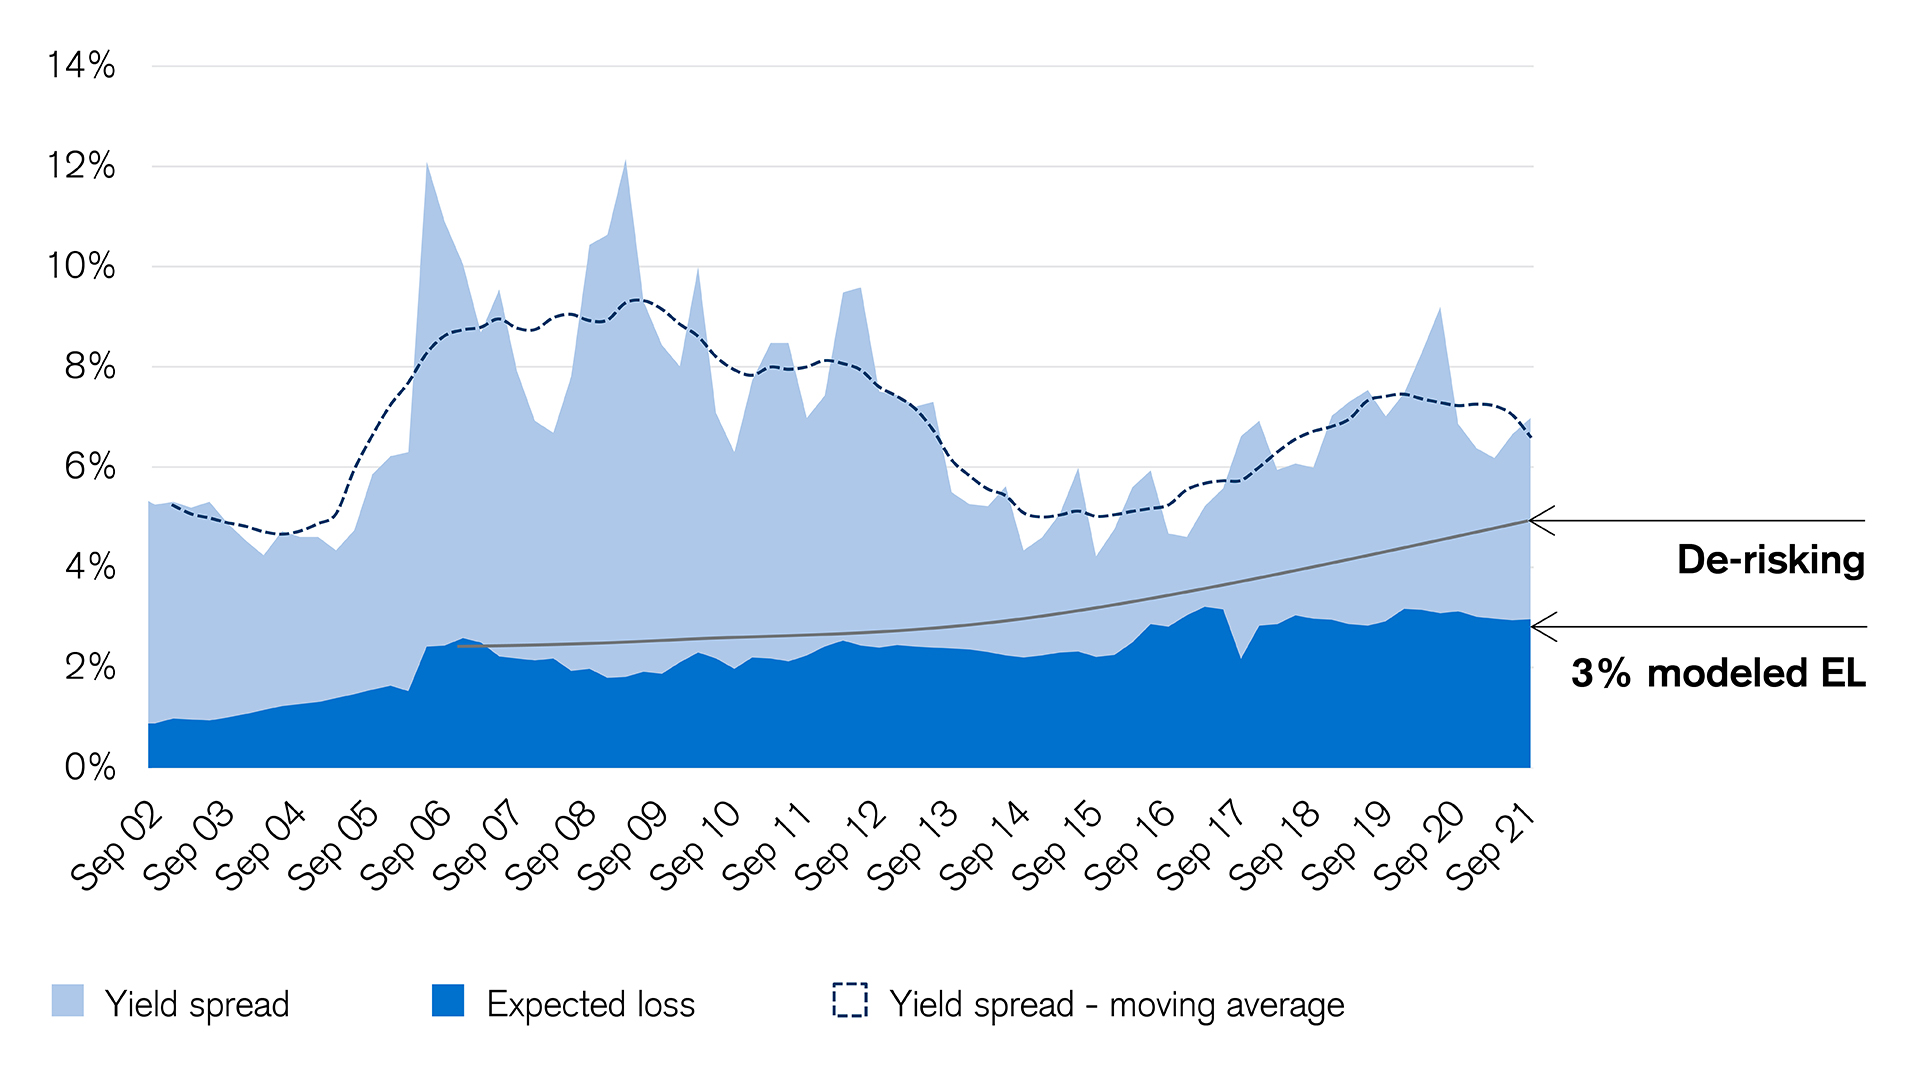 Historical cat bond yield spread and expected loss from Lane Financial